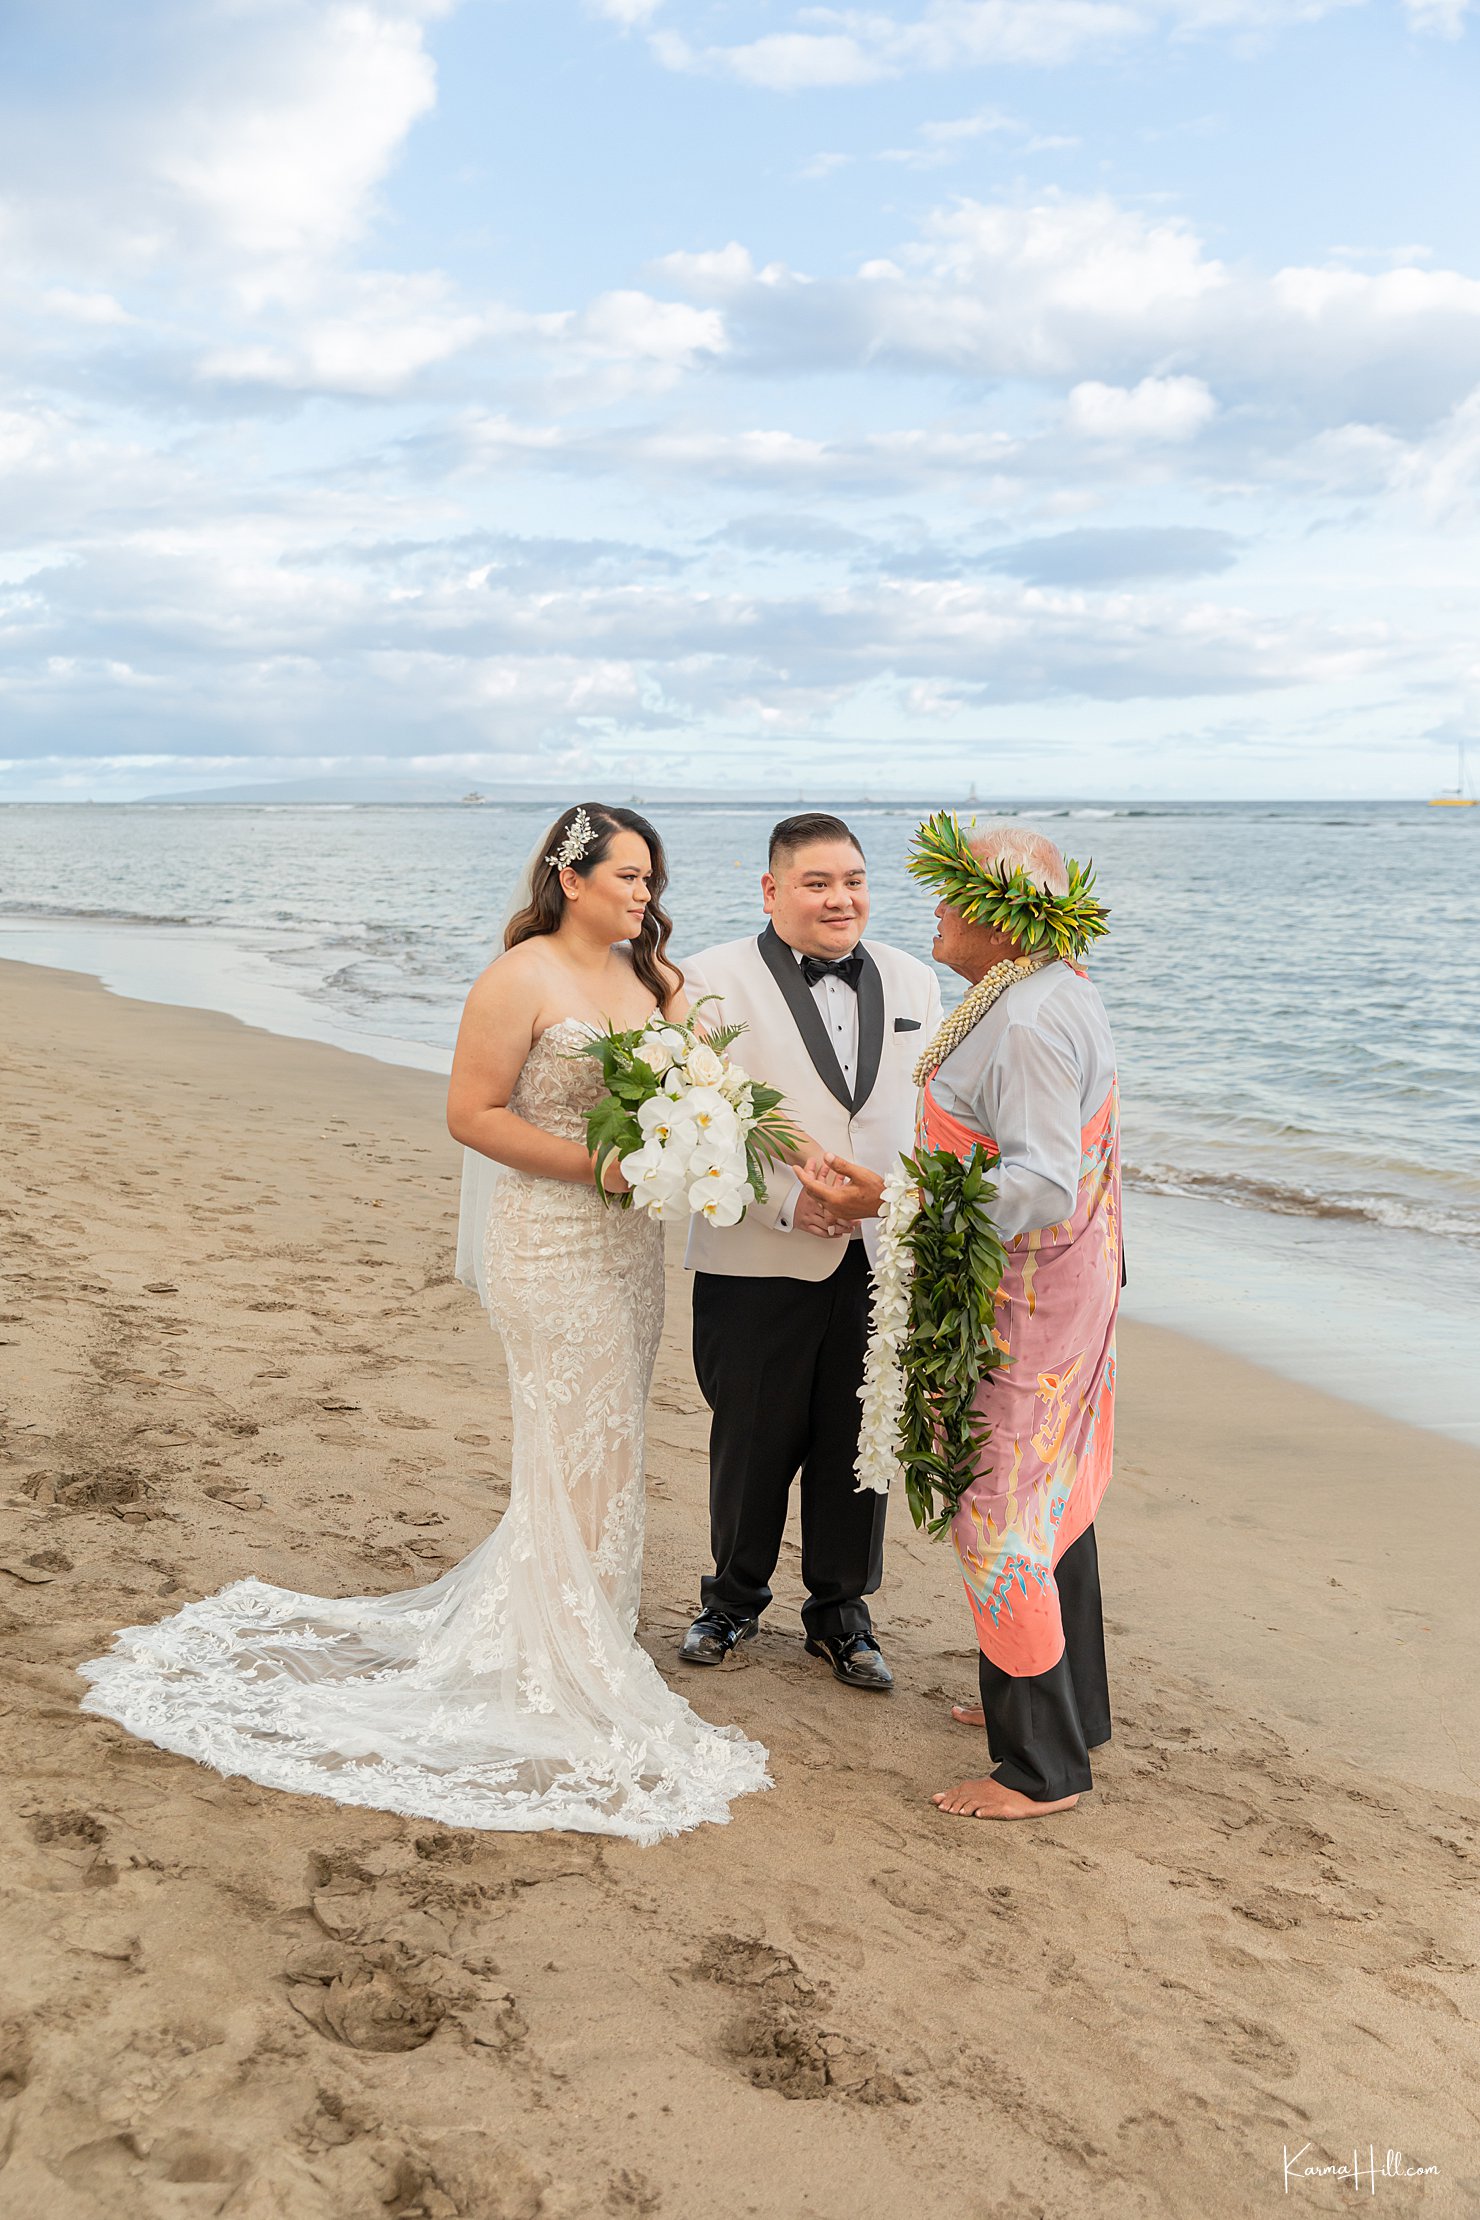 elope in Maui with Simple Maui Wedding